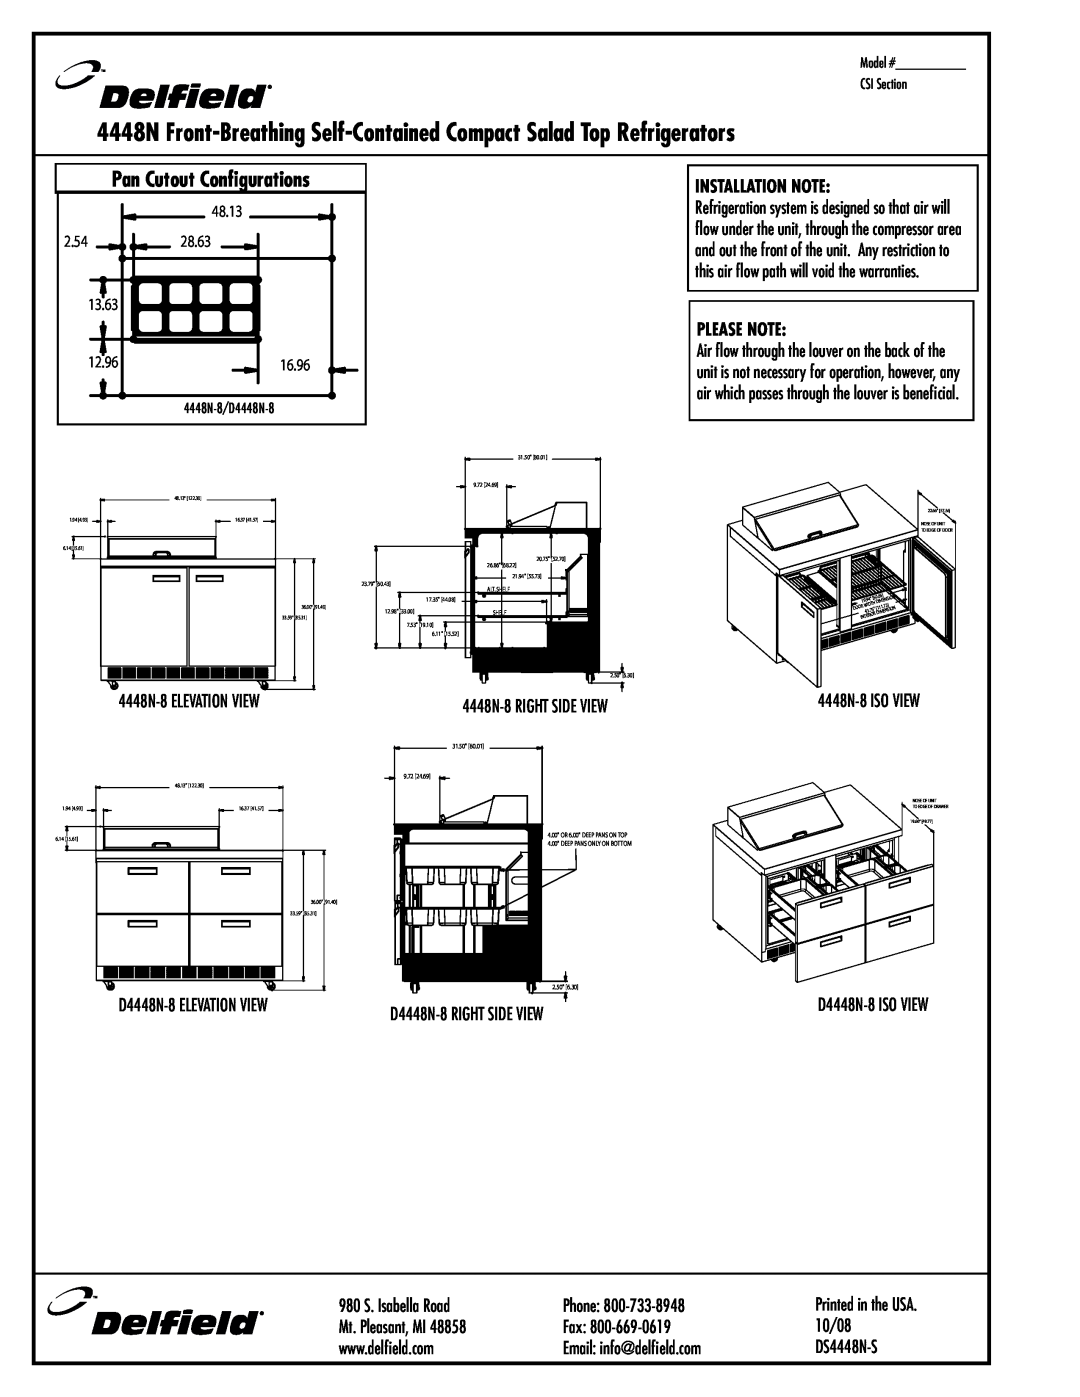 Delfield D4448N-8 specifications Pan Cutout Configurations, Installation Note, Please Note 